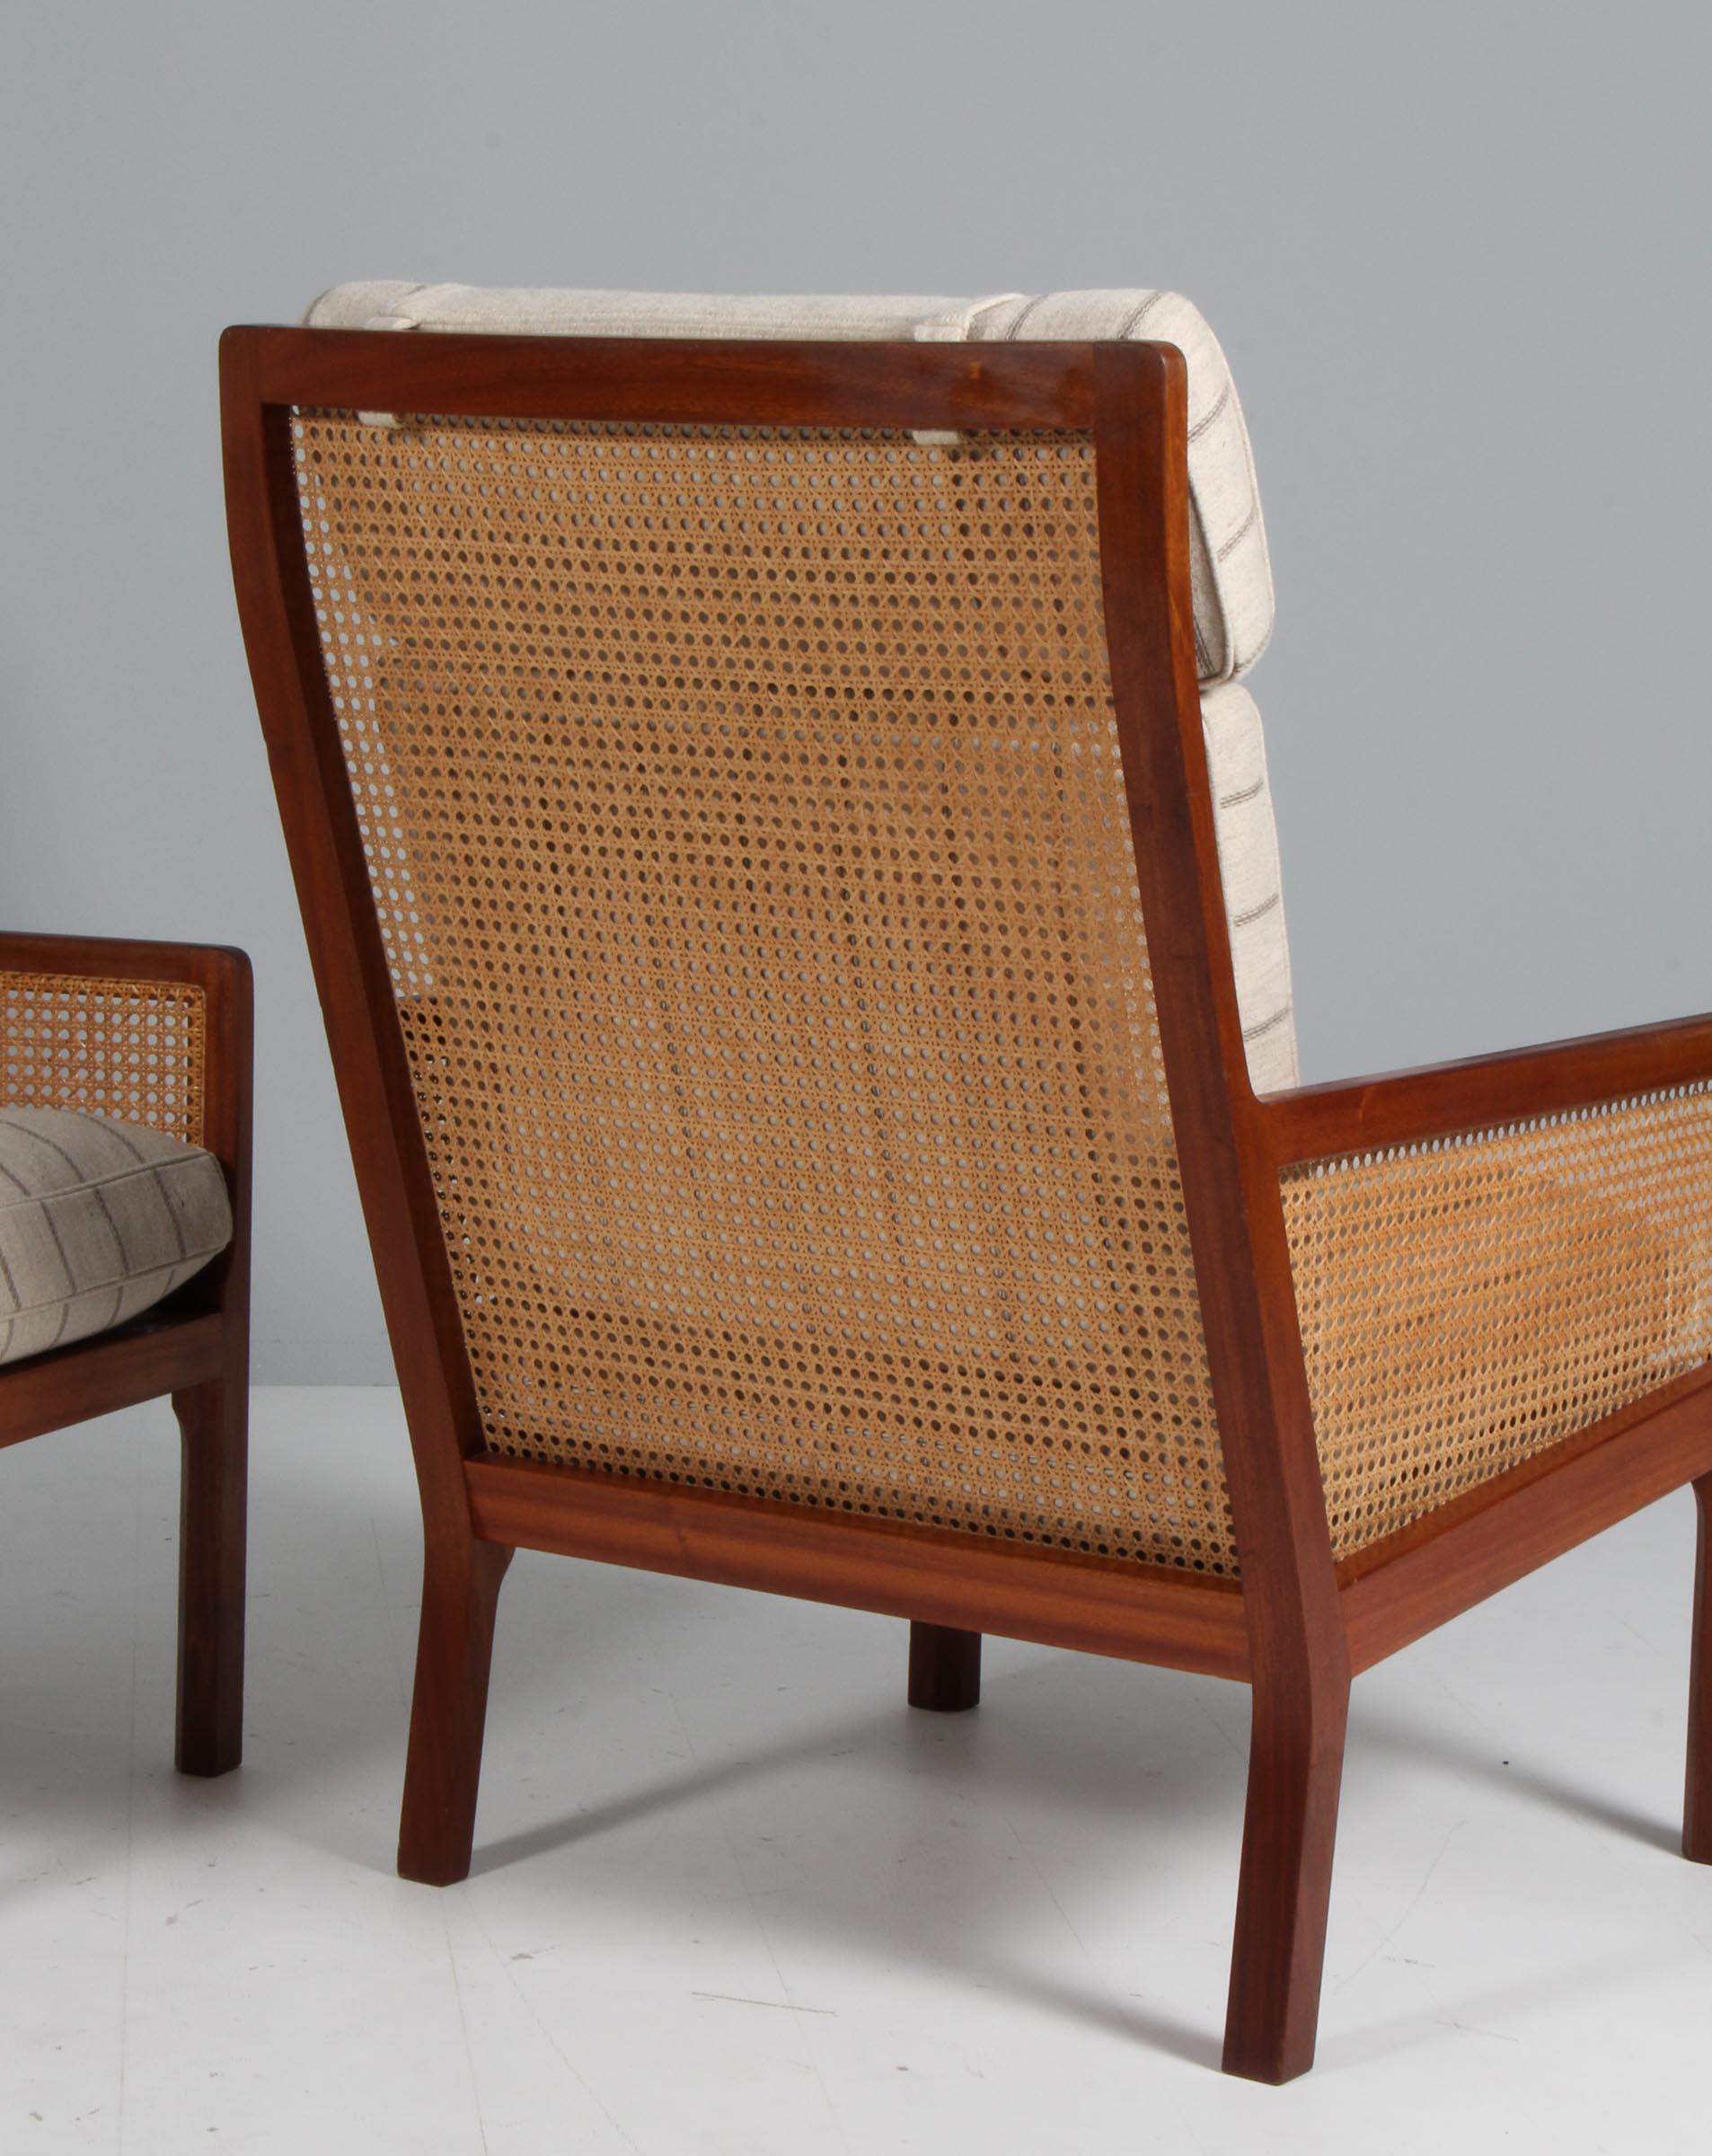 Bernt Pedersen lounge chair, mahogany and Cane For Sale 3